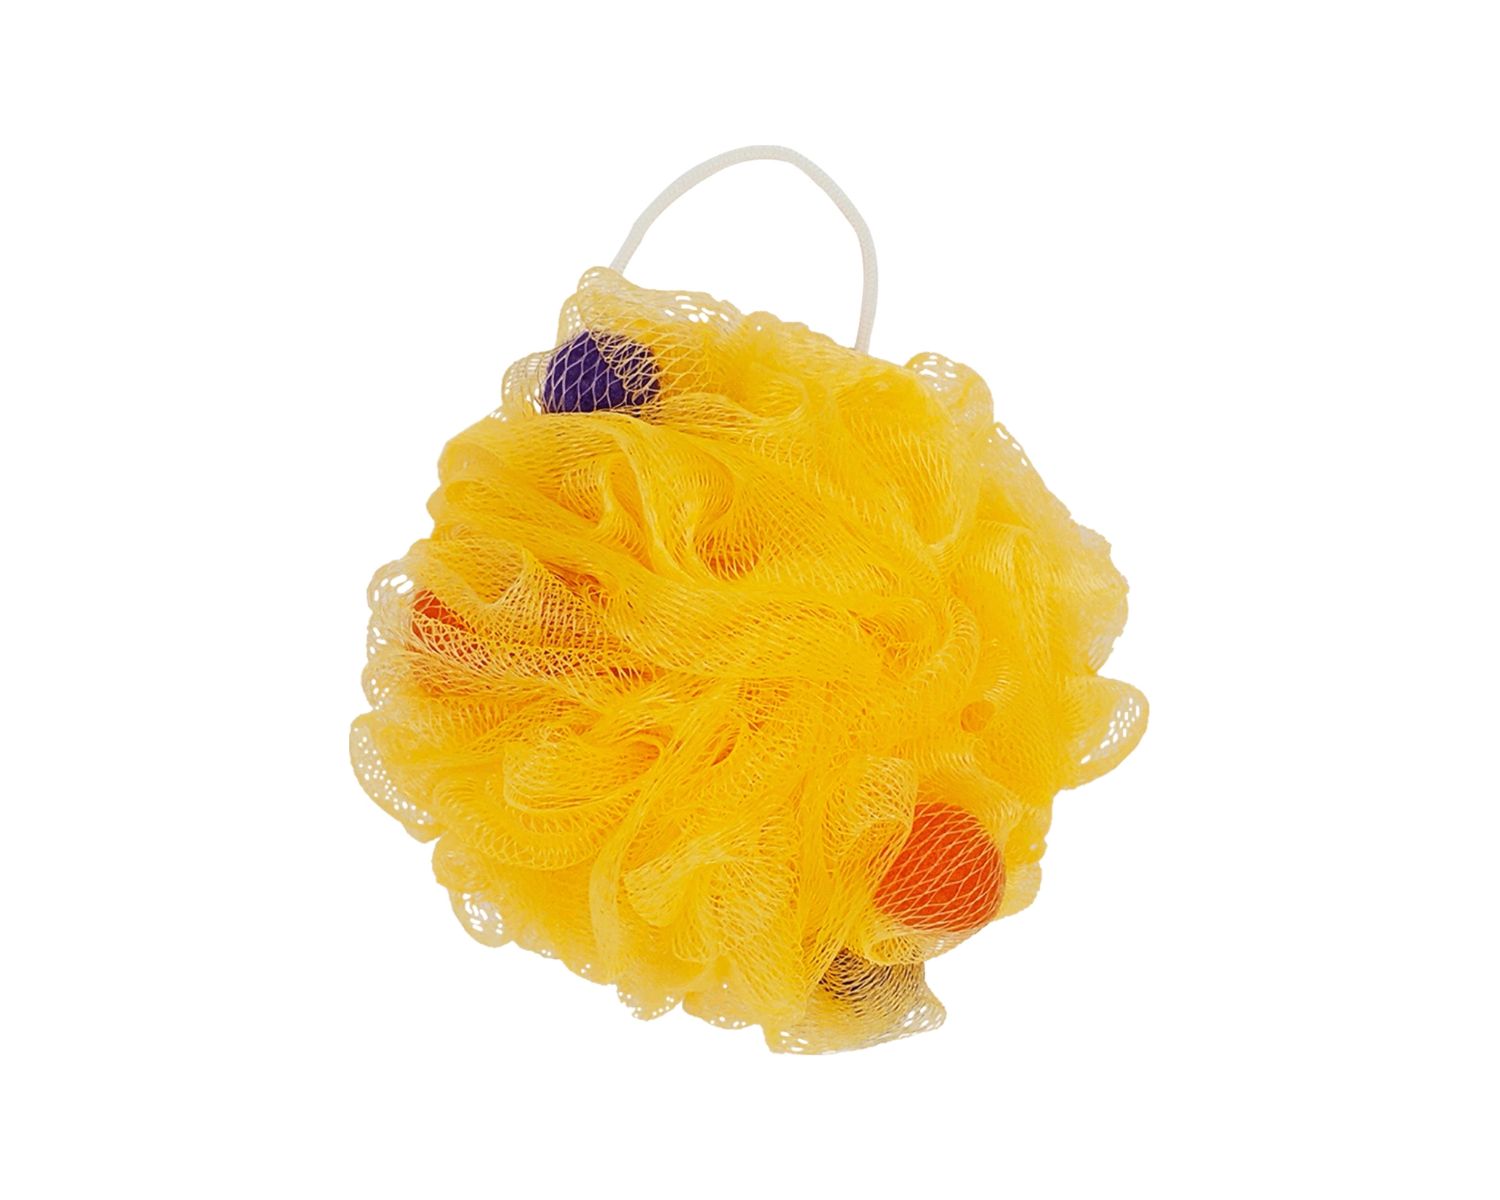 What Does A Yellow Loofah Mean